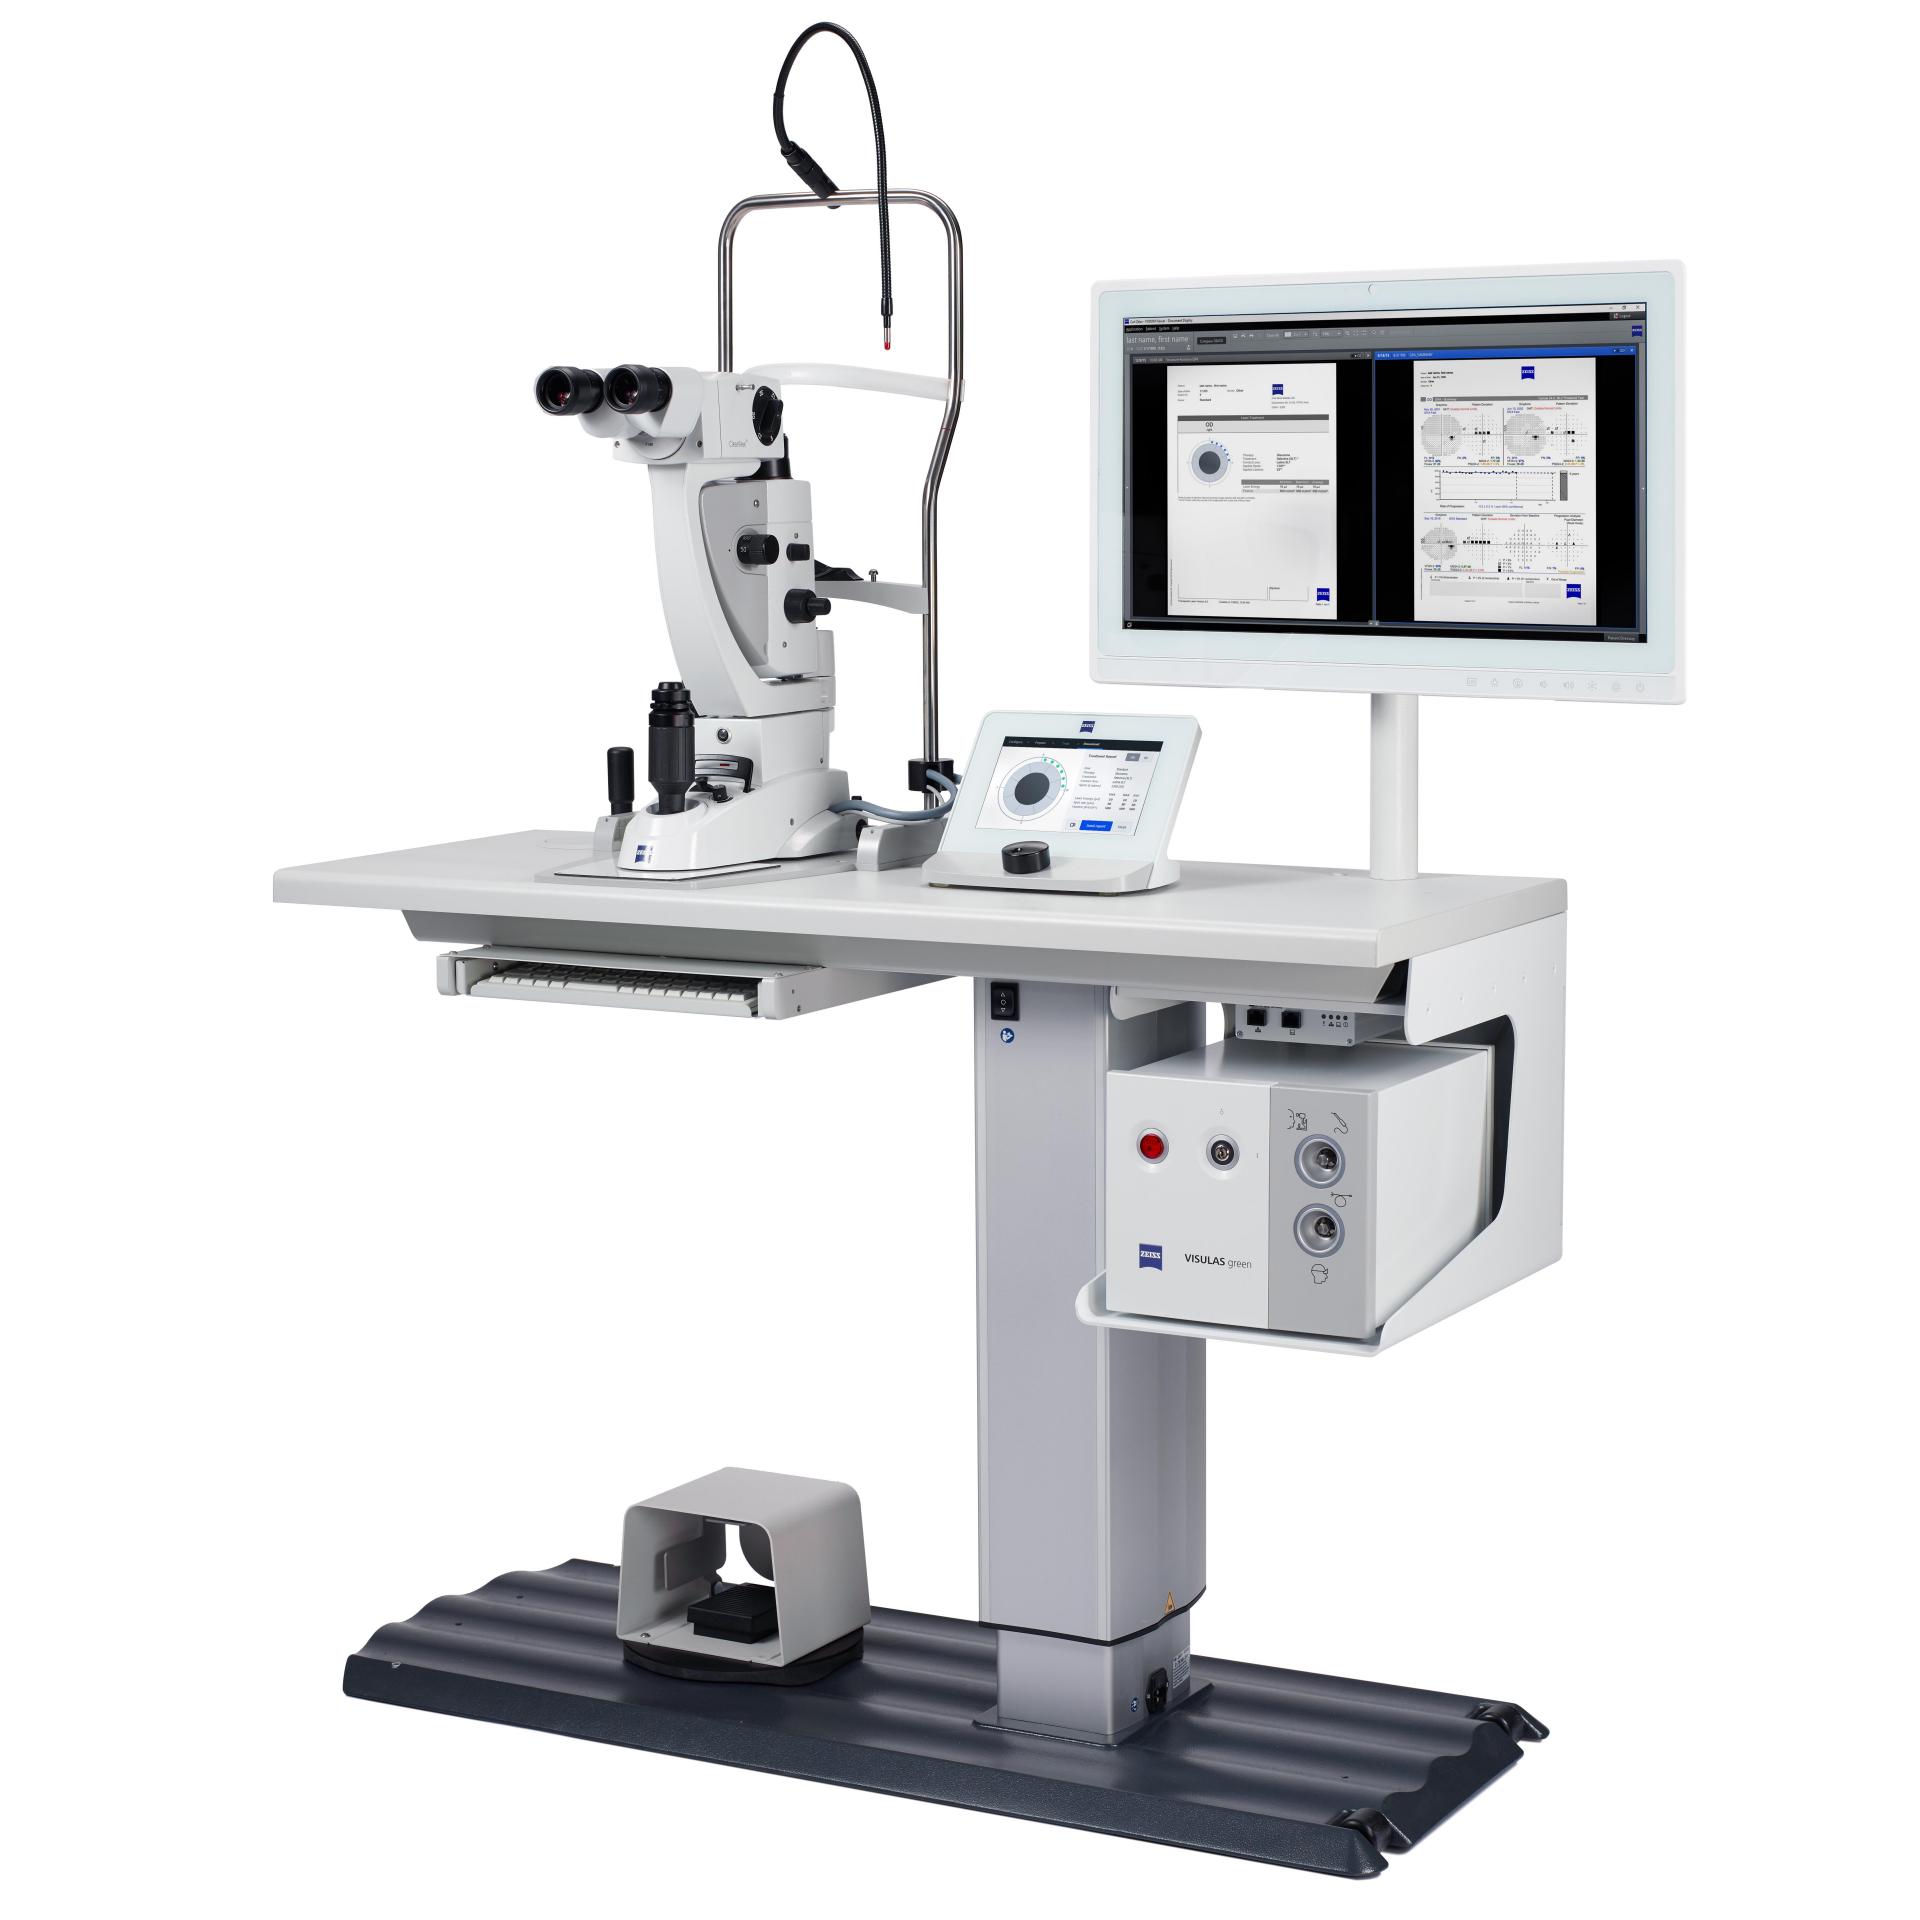 Maximize your glaucoma workflow with the ZEISS Selective Laser Trabeculoplasty (SLT) application for the VISULAS green therapeutic laser from ZEISS